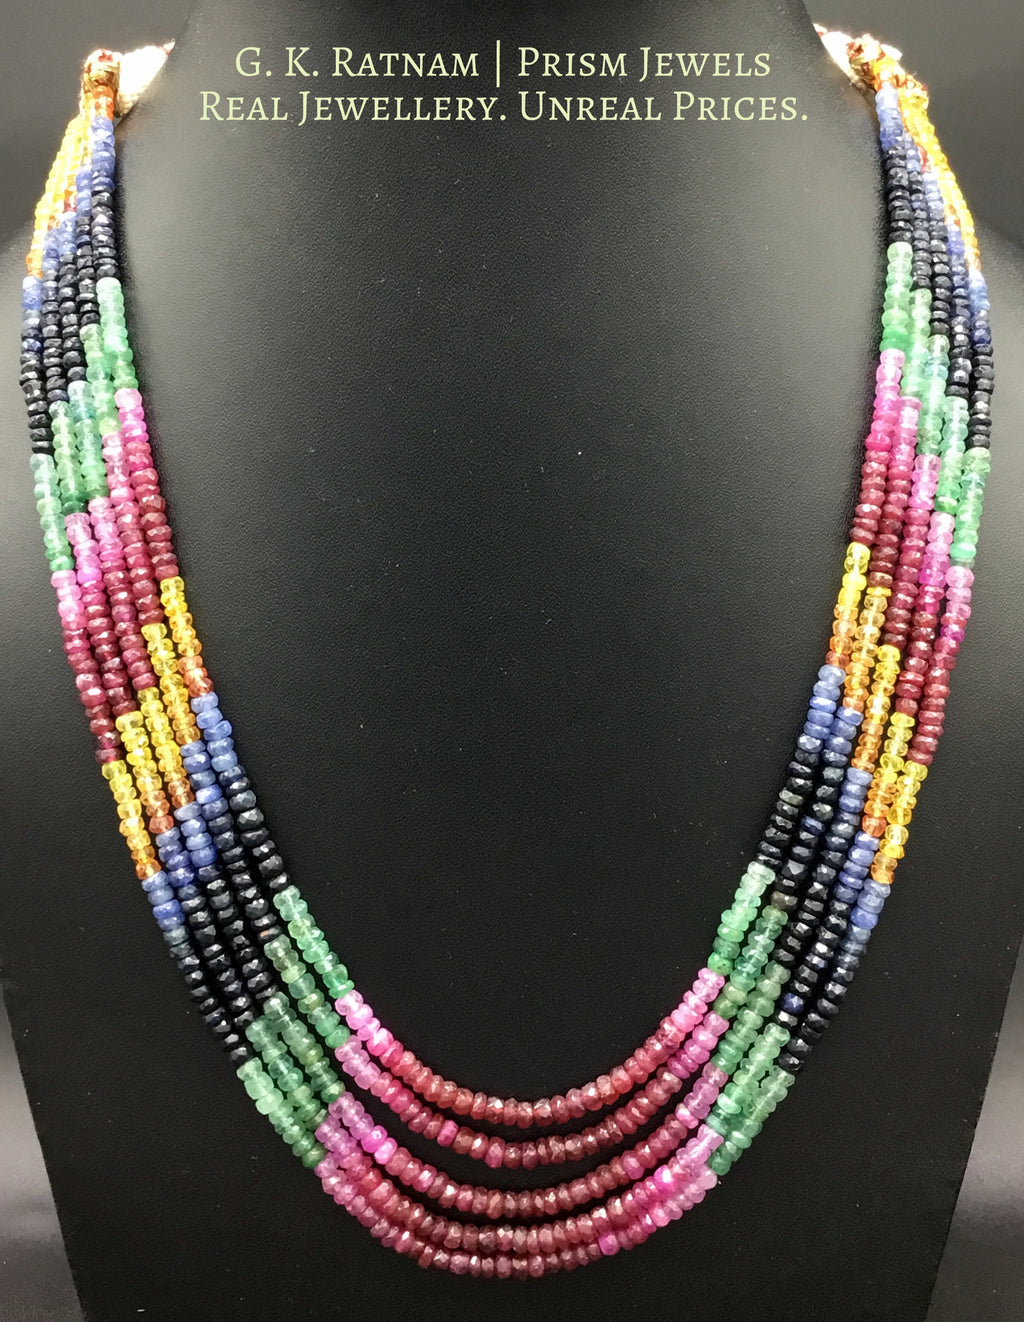 Five-row Rainbow Necklace with Natural rubies, emeralds, blue and yellow sapphires - G. K. Ratnam